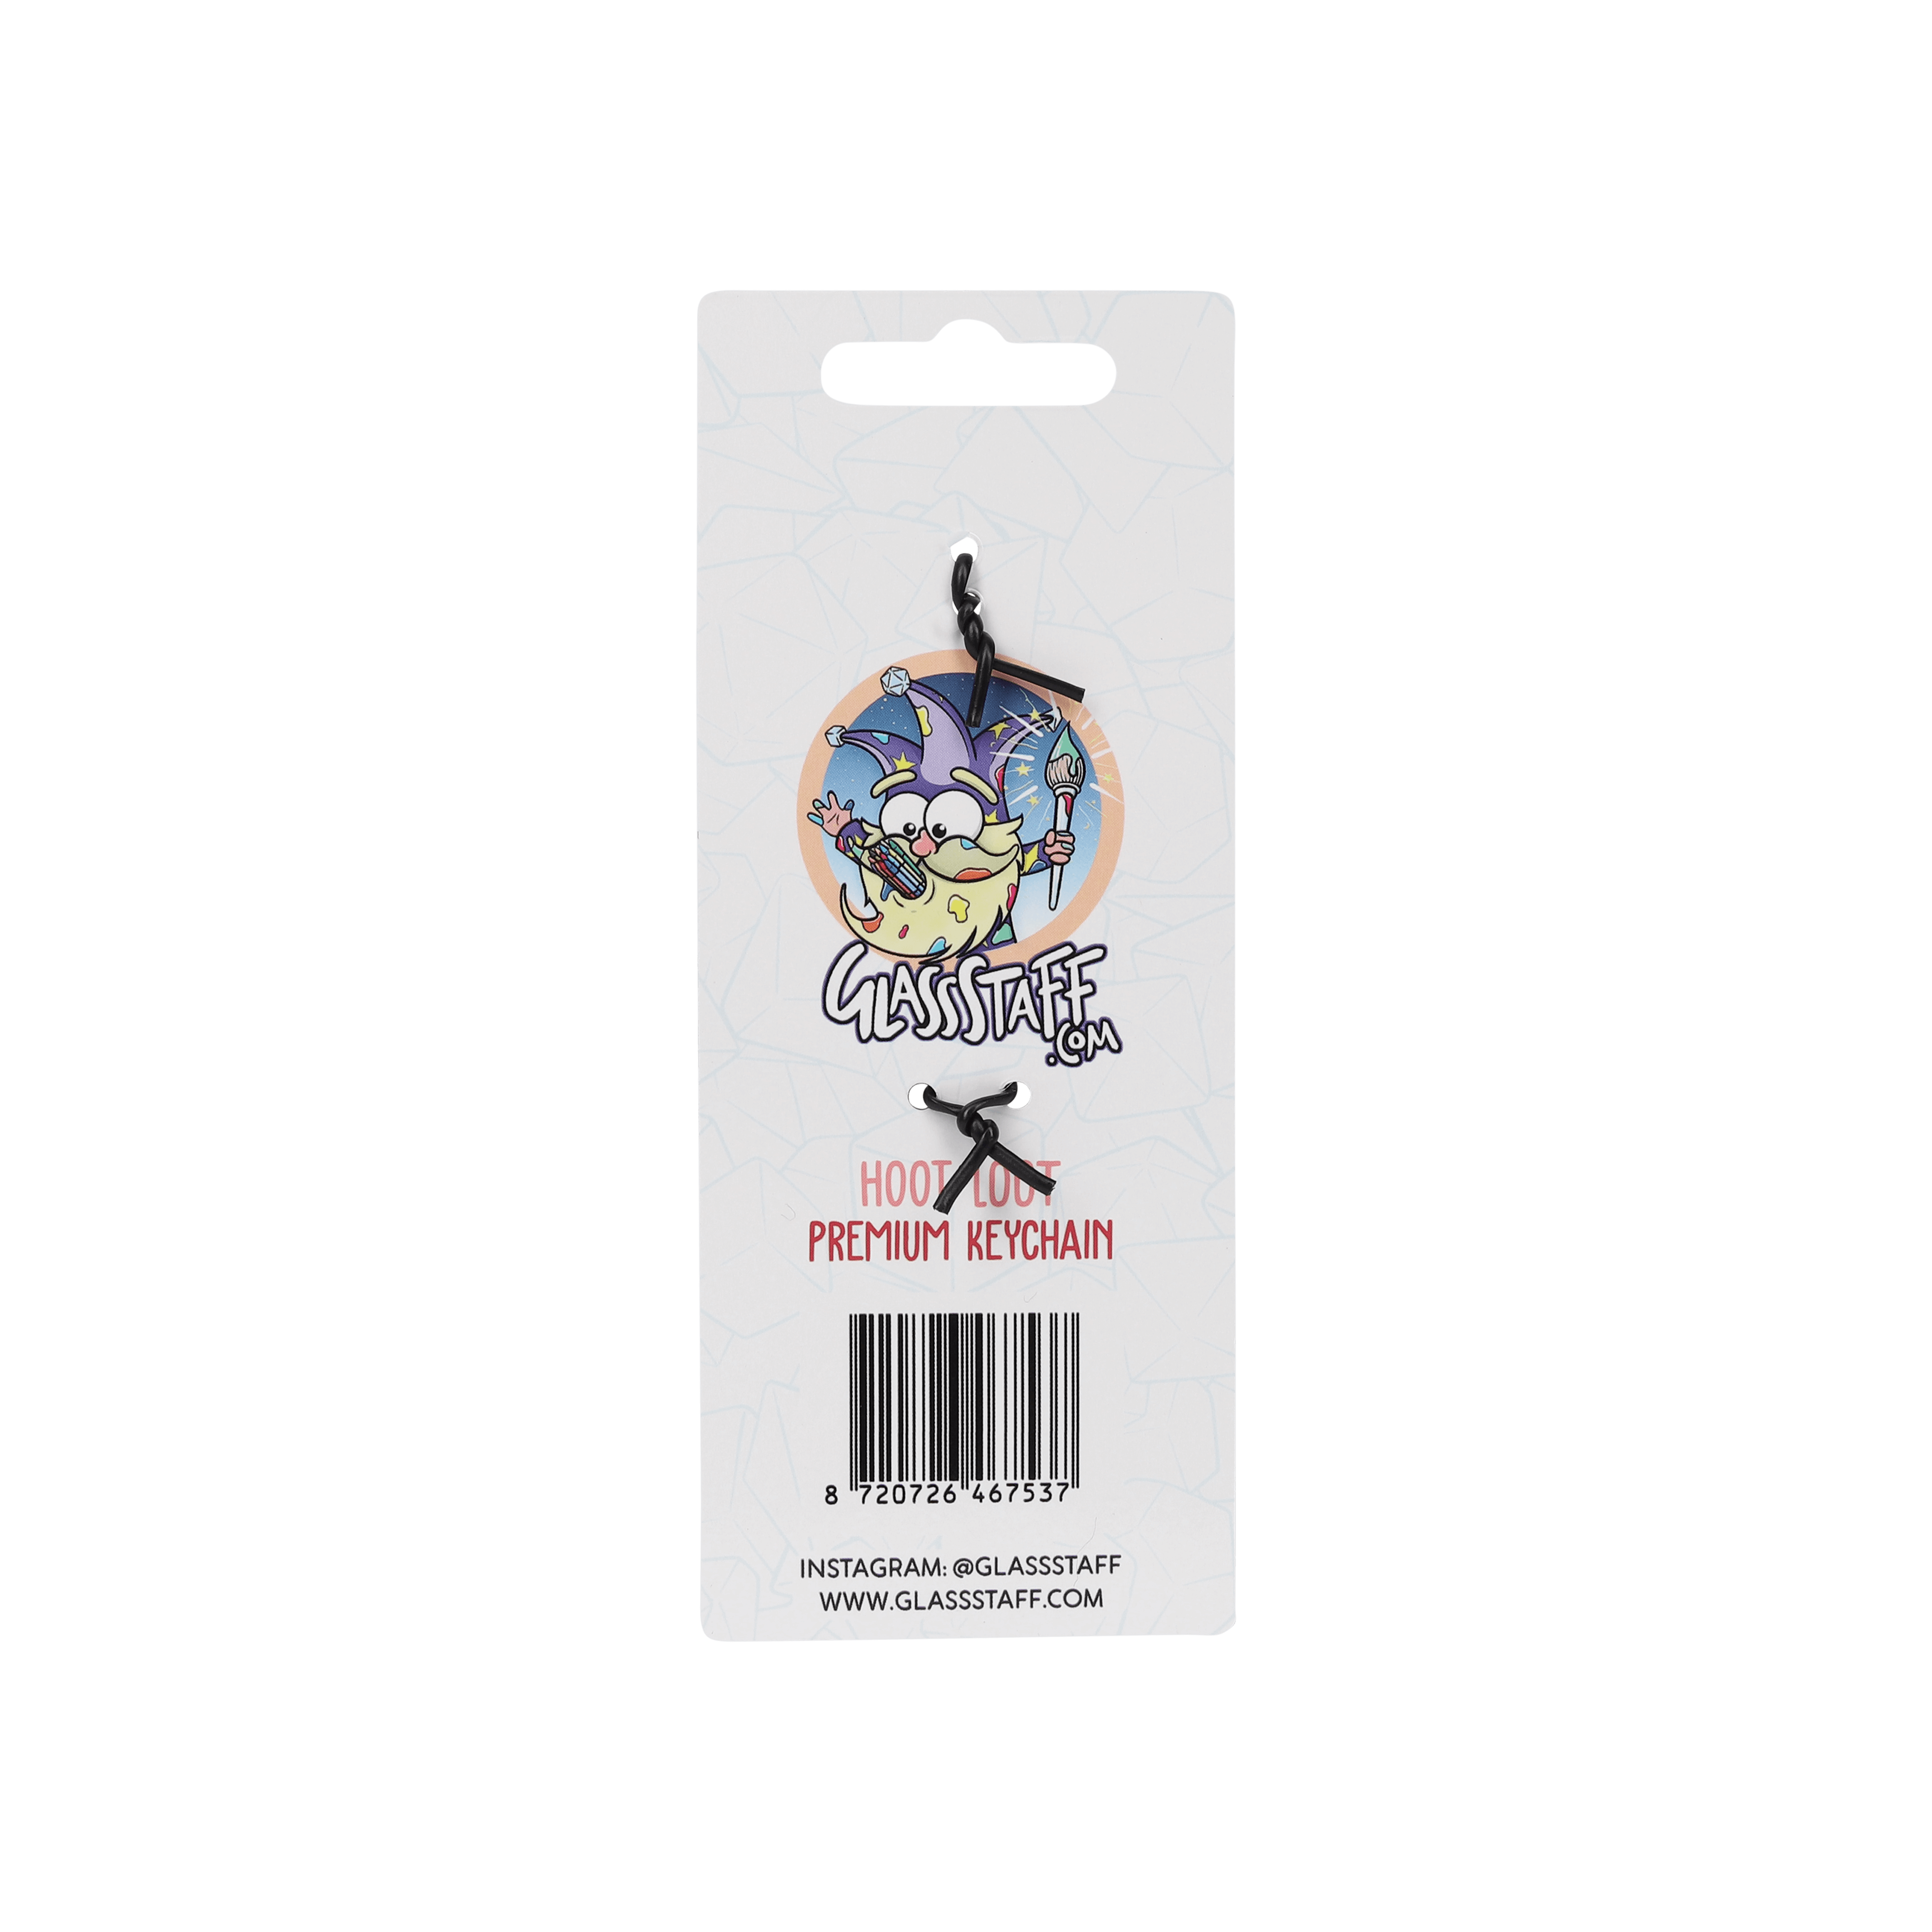 Gimme Loot Keychain